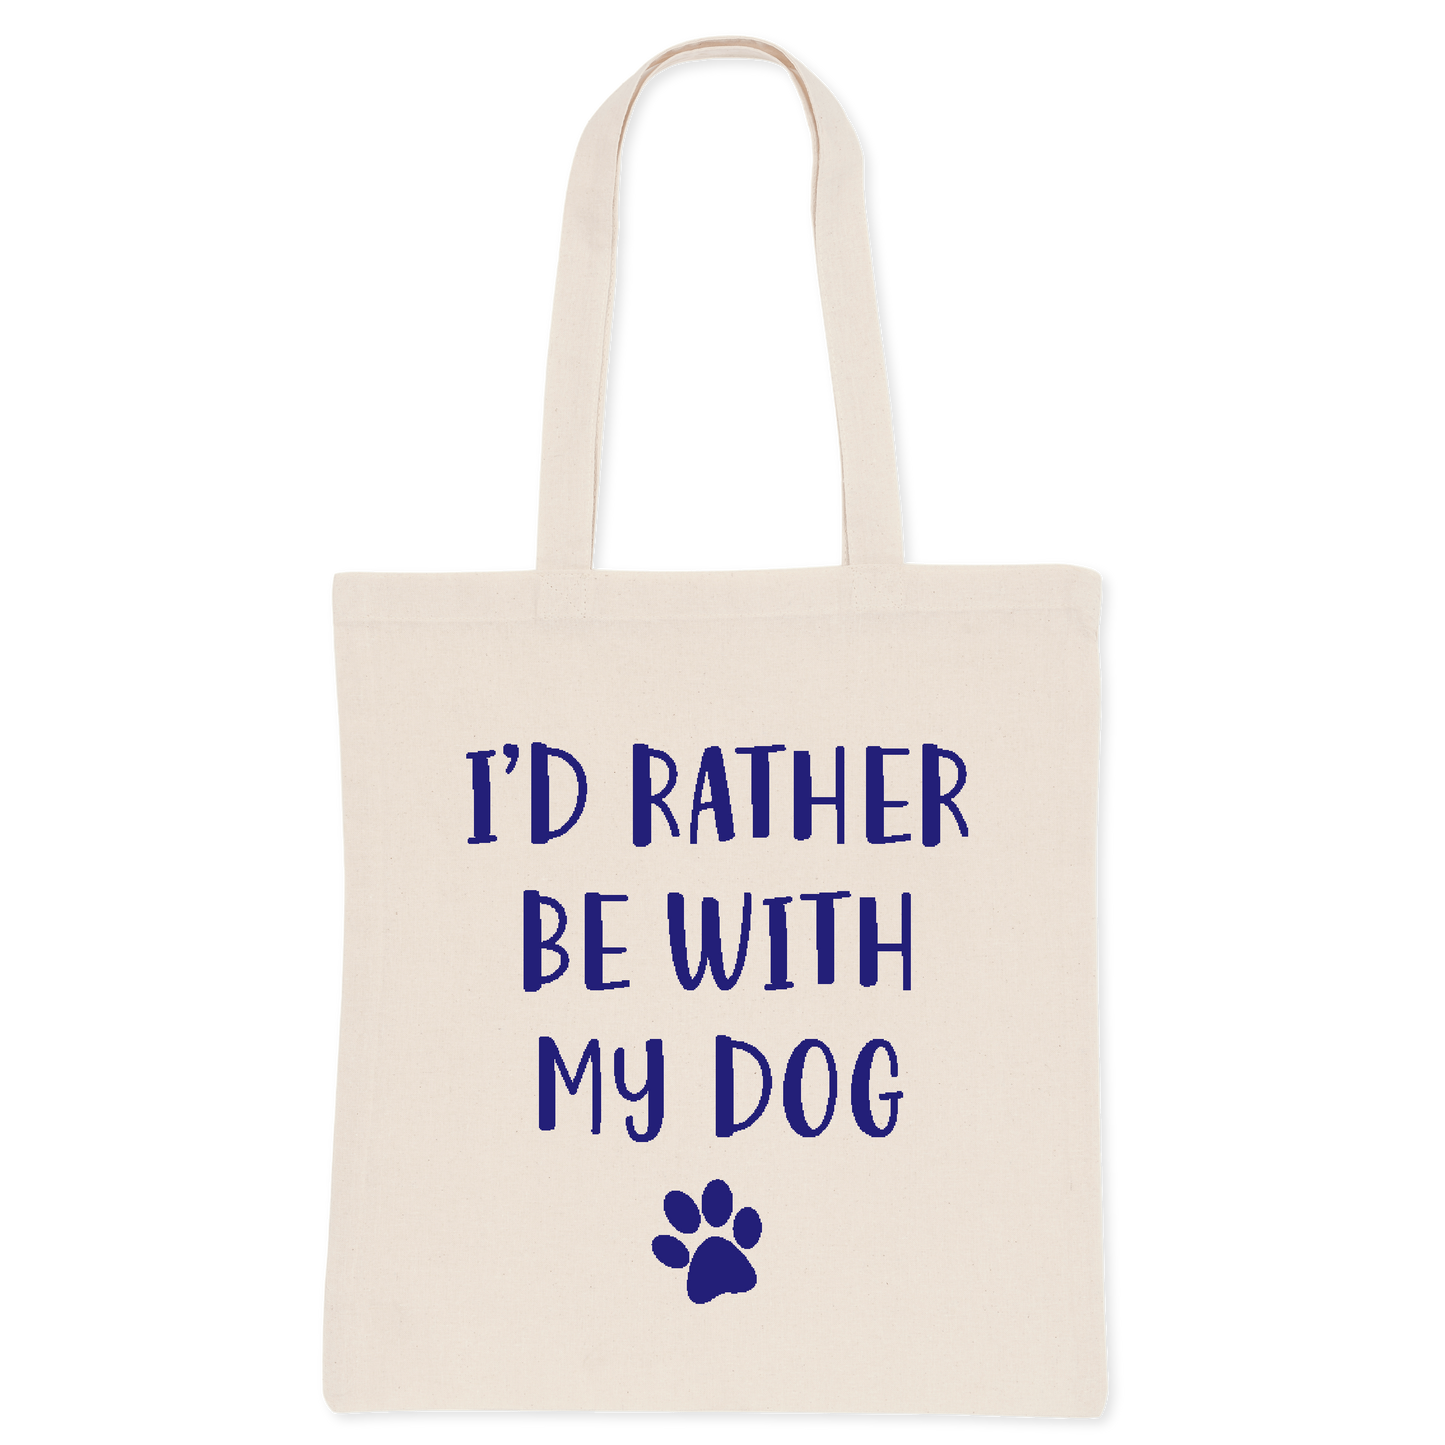 I'd Rather Be With My Dog - Tote Bag